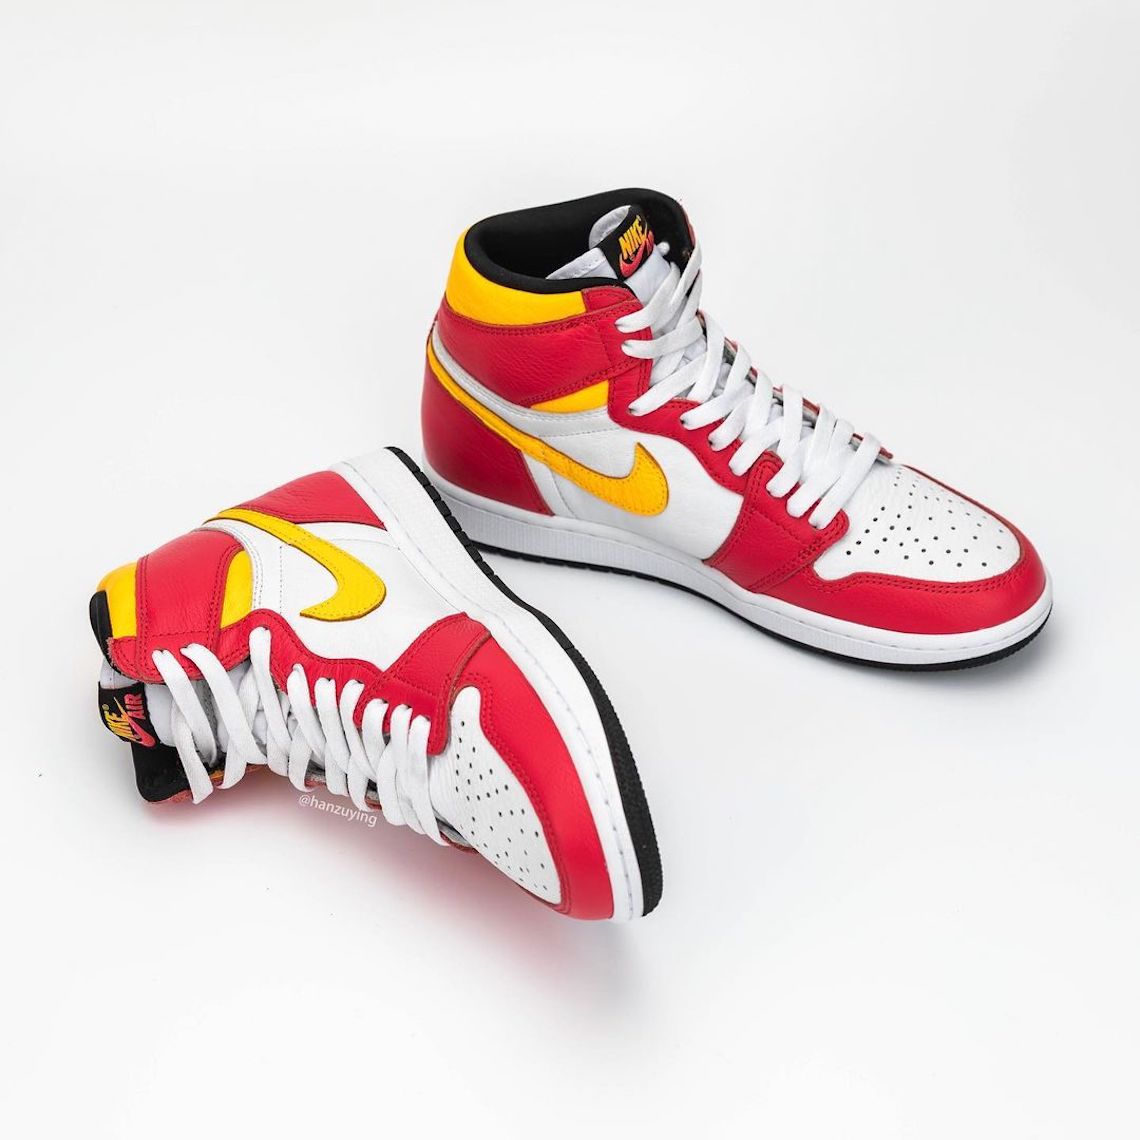 Air Jordan 1 Faded Light Fusion Red 555088 603 Release Date - GmarShops  Marketplace - 14 White Black CT8529 - 106